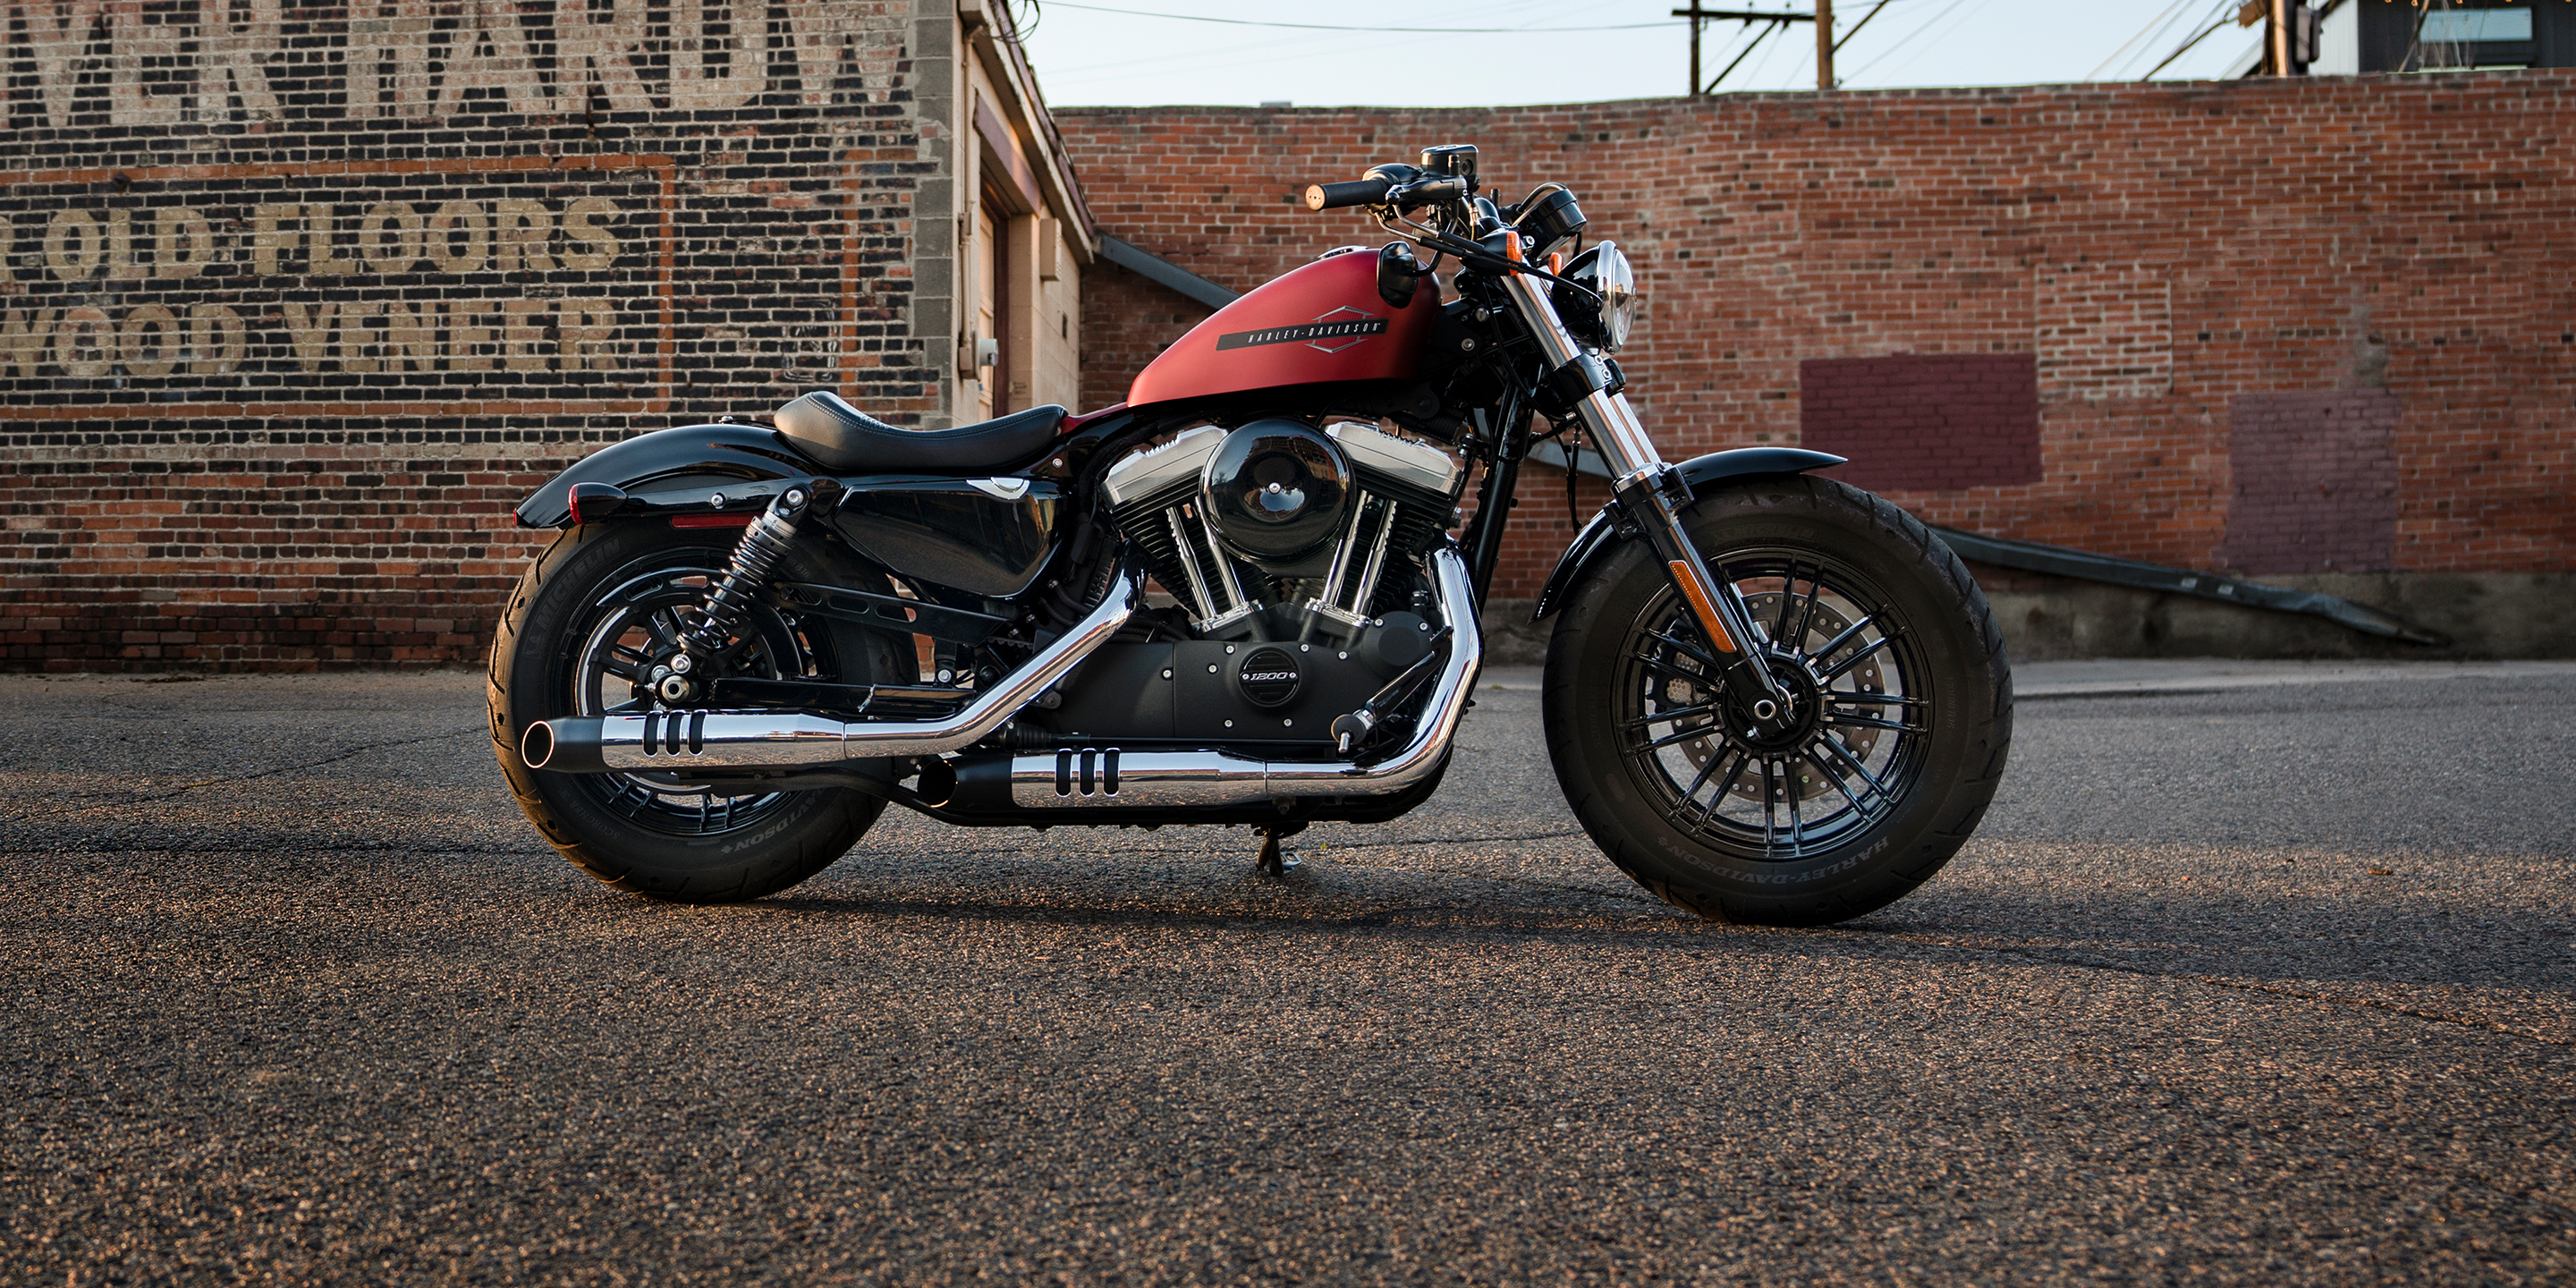  2019 Forty Eight Motorcycle Harley Davidson USA